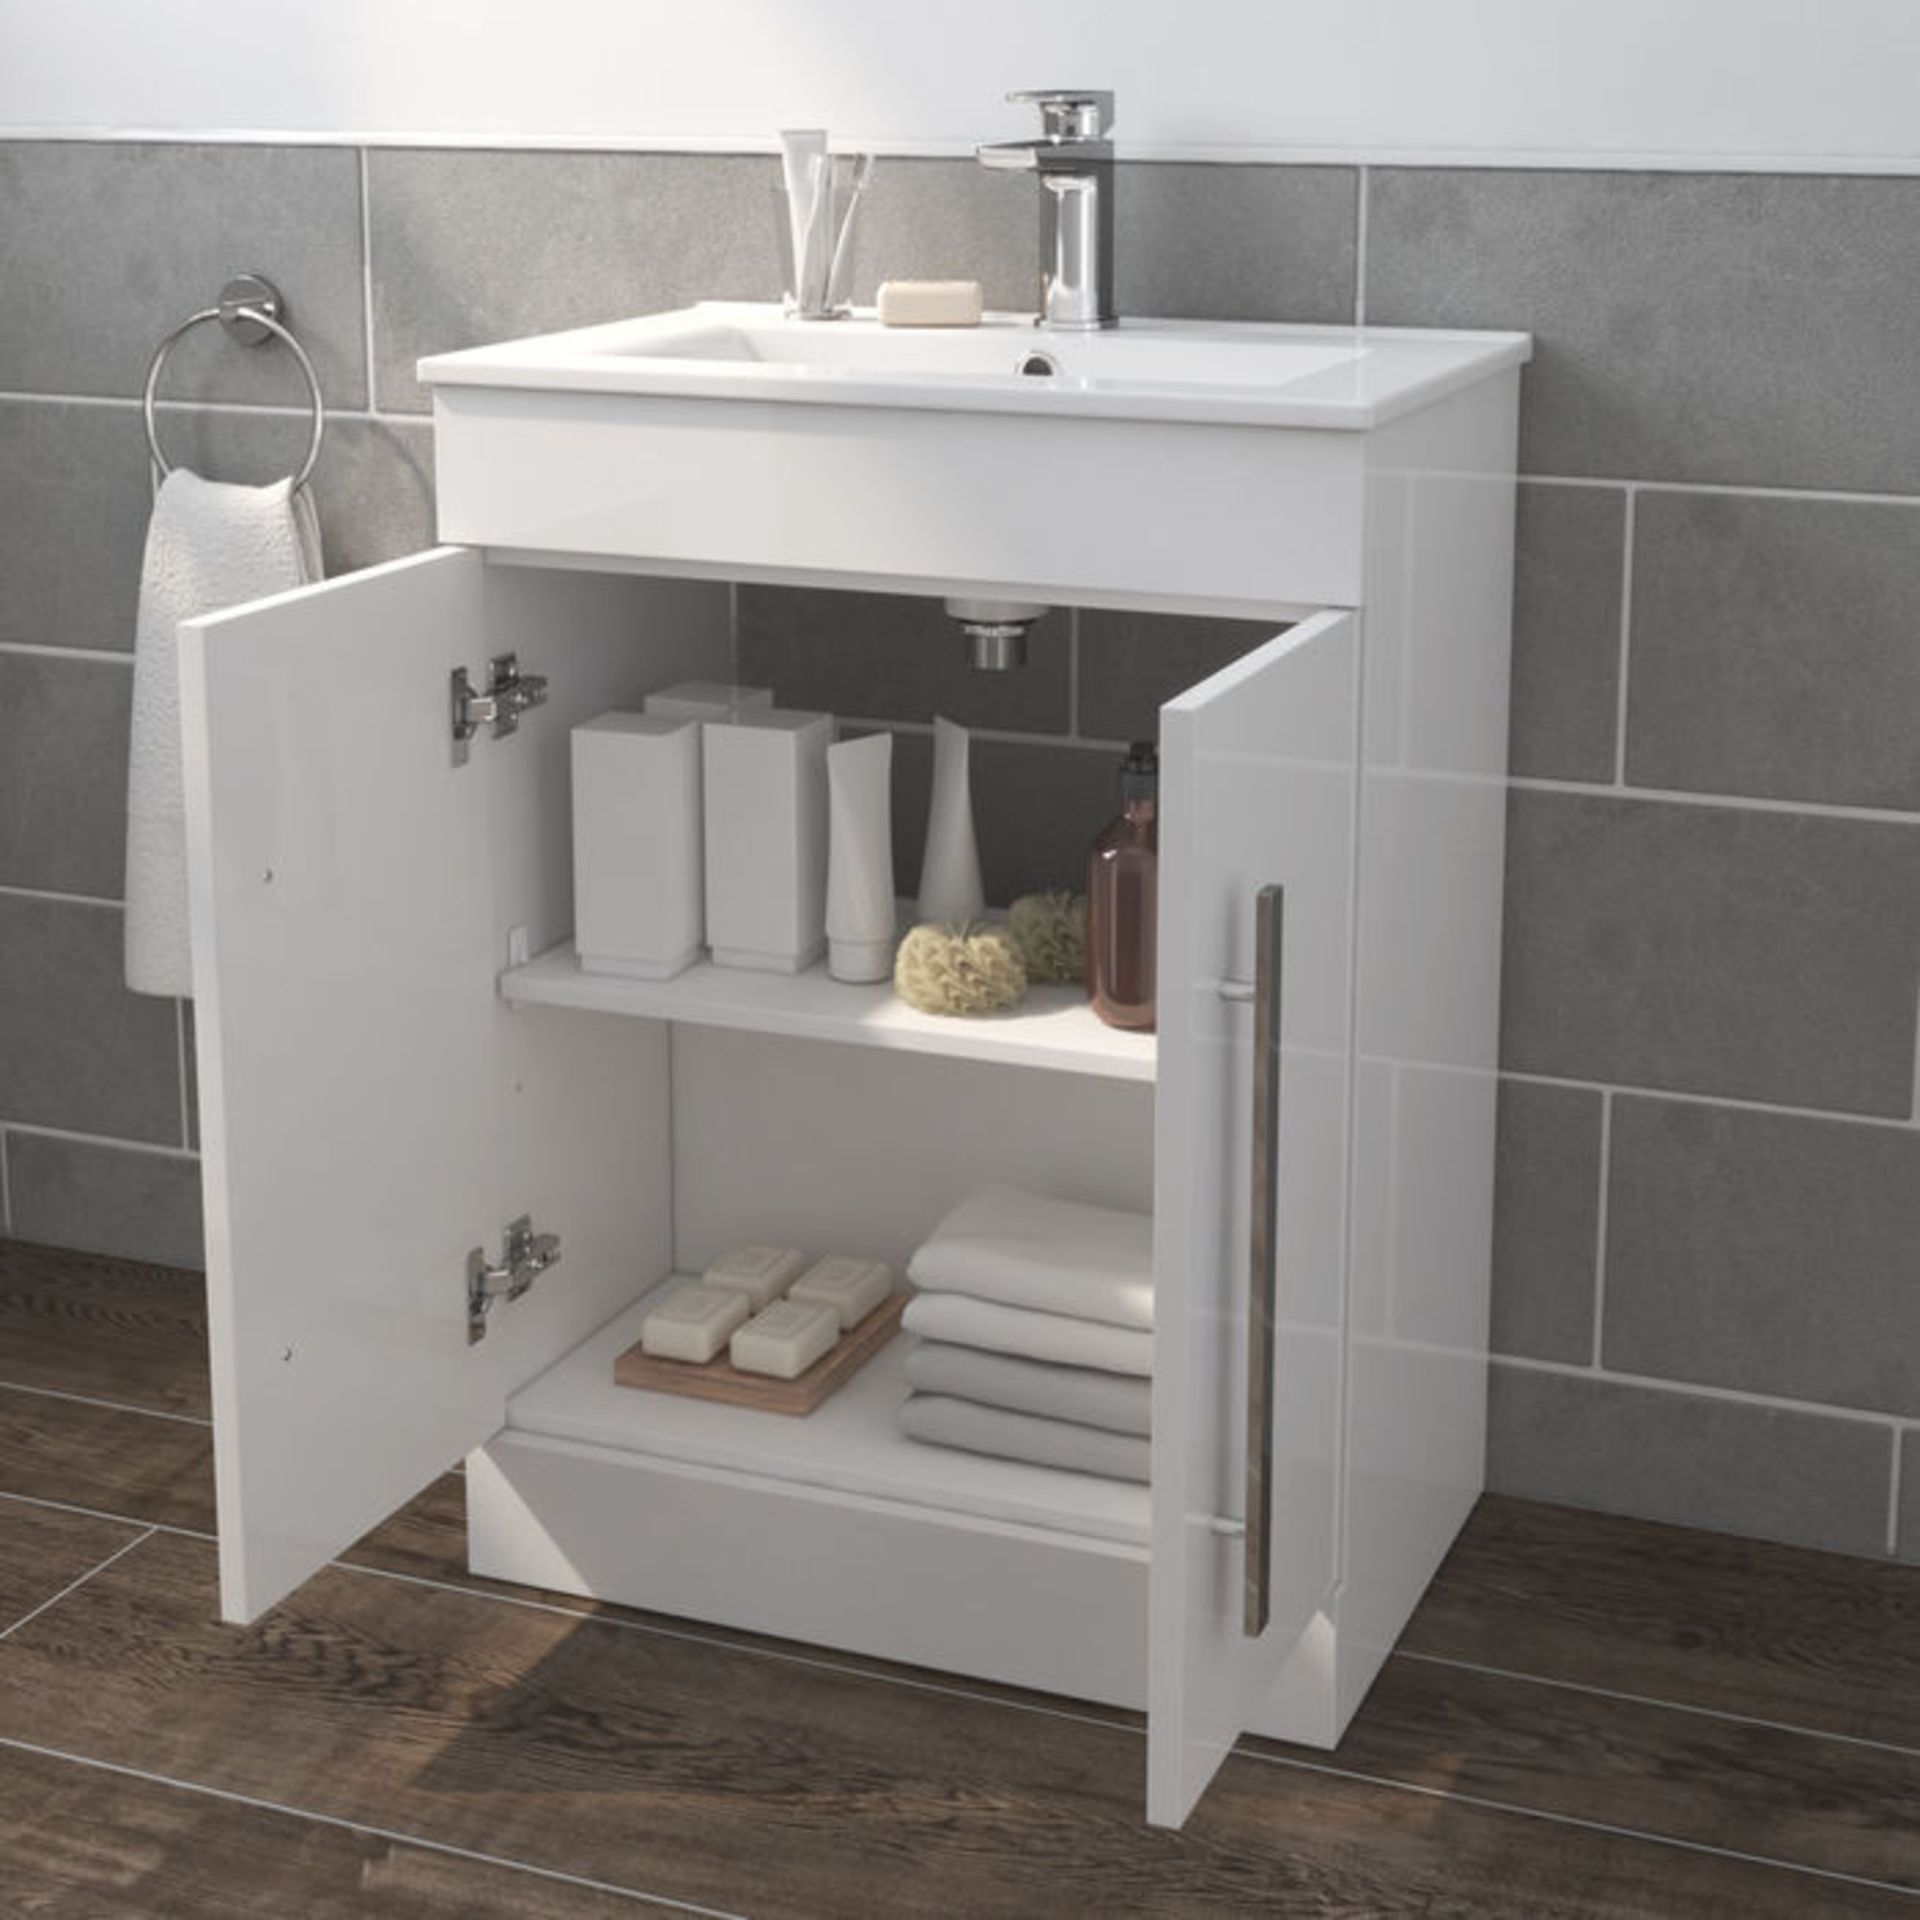 (A67) 600mm Avon High Gloss White Sink Cabinet - Floor Standing. Comes complete with basin. Re... - Image 2 of 4